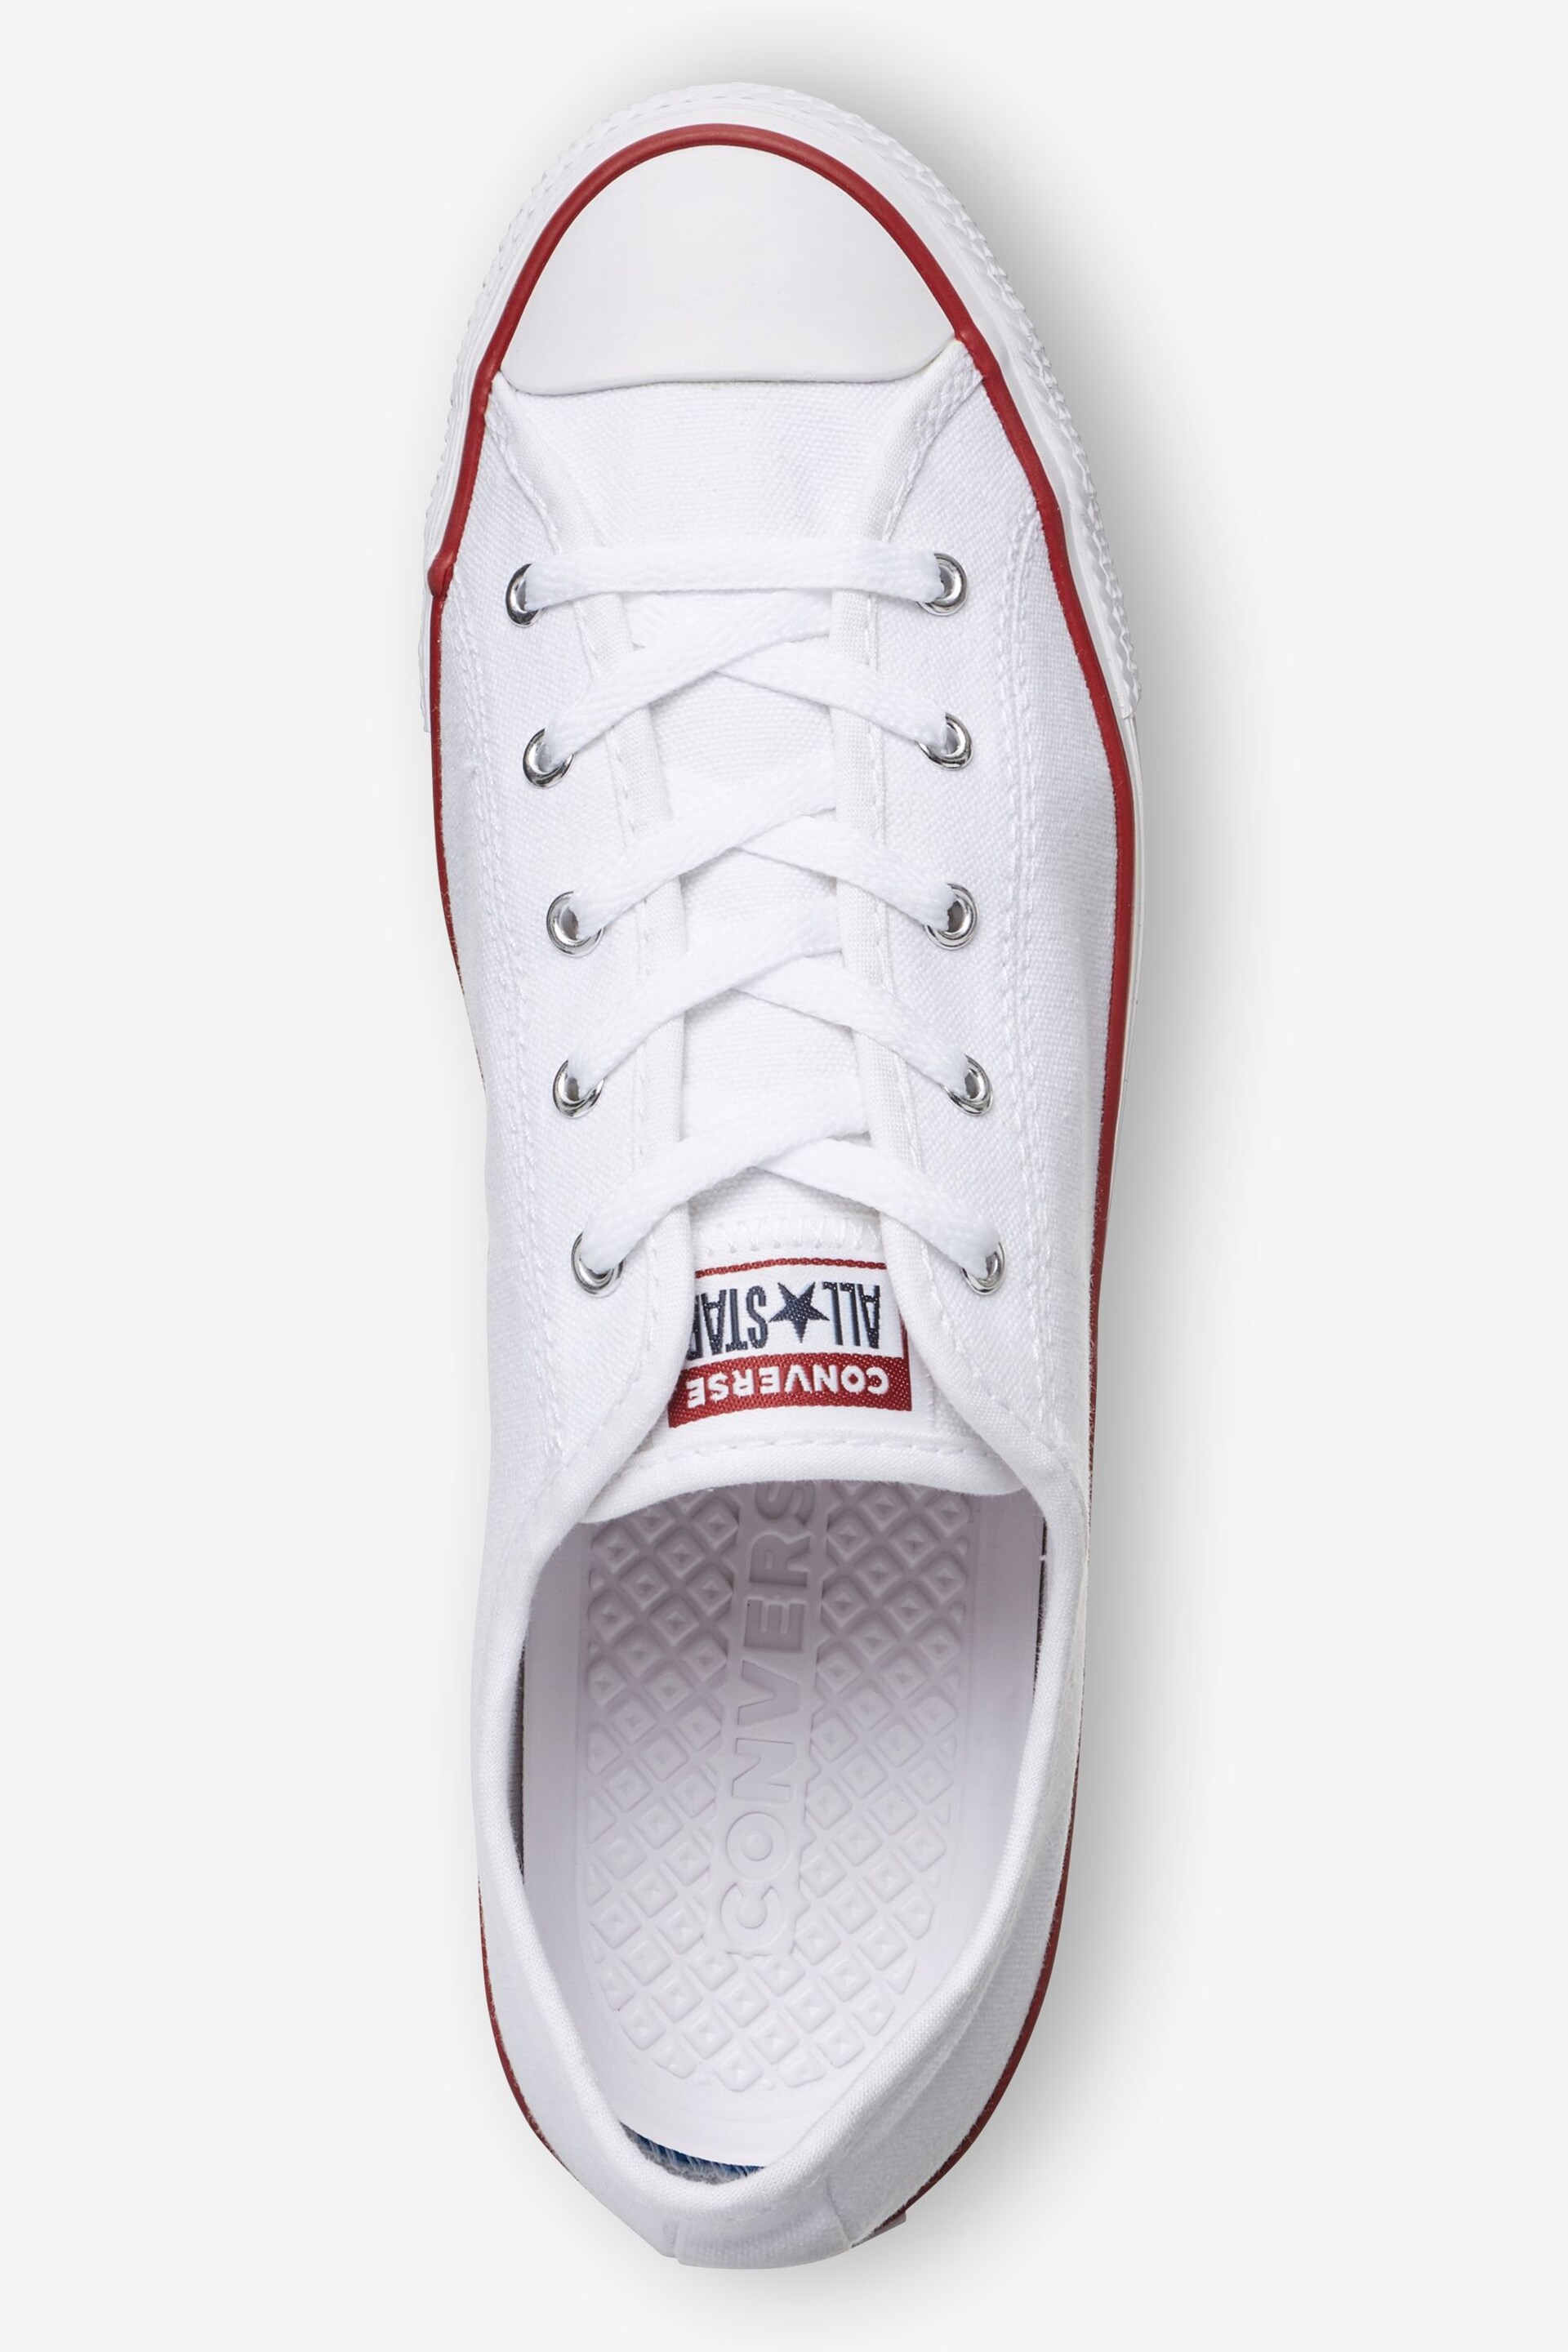 Converse White Dainty Trainers - Image 3 of 5